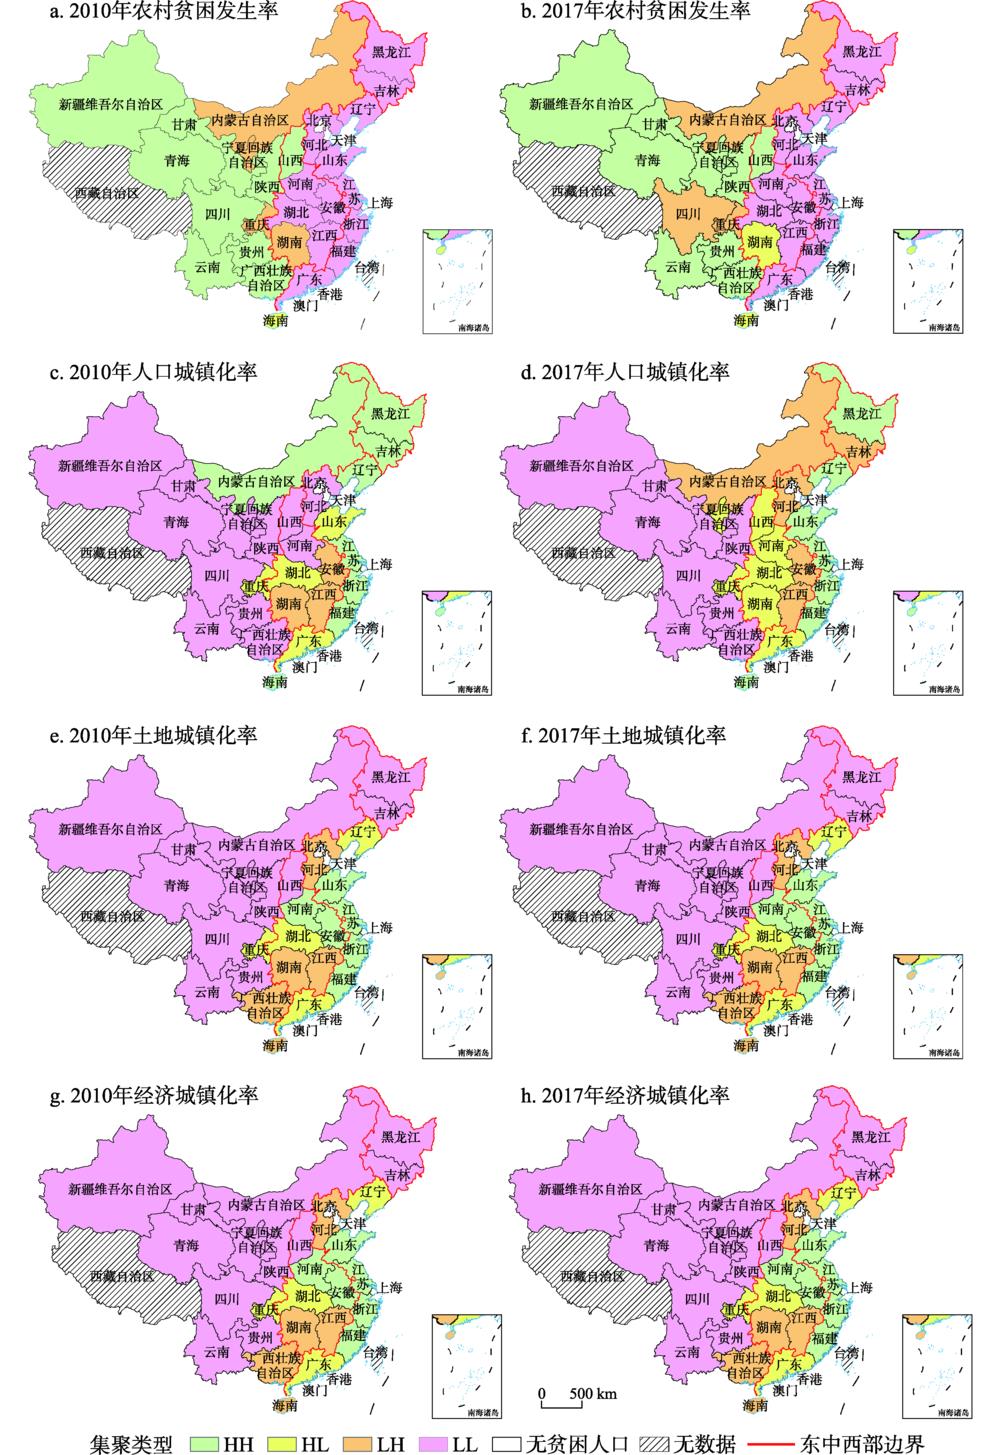 Spatial clustering of rural poverty and urbanization in provinces of China from 2010 to 2017